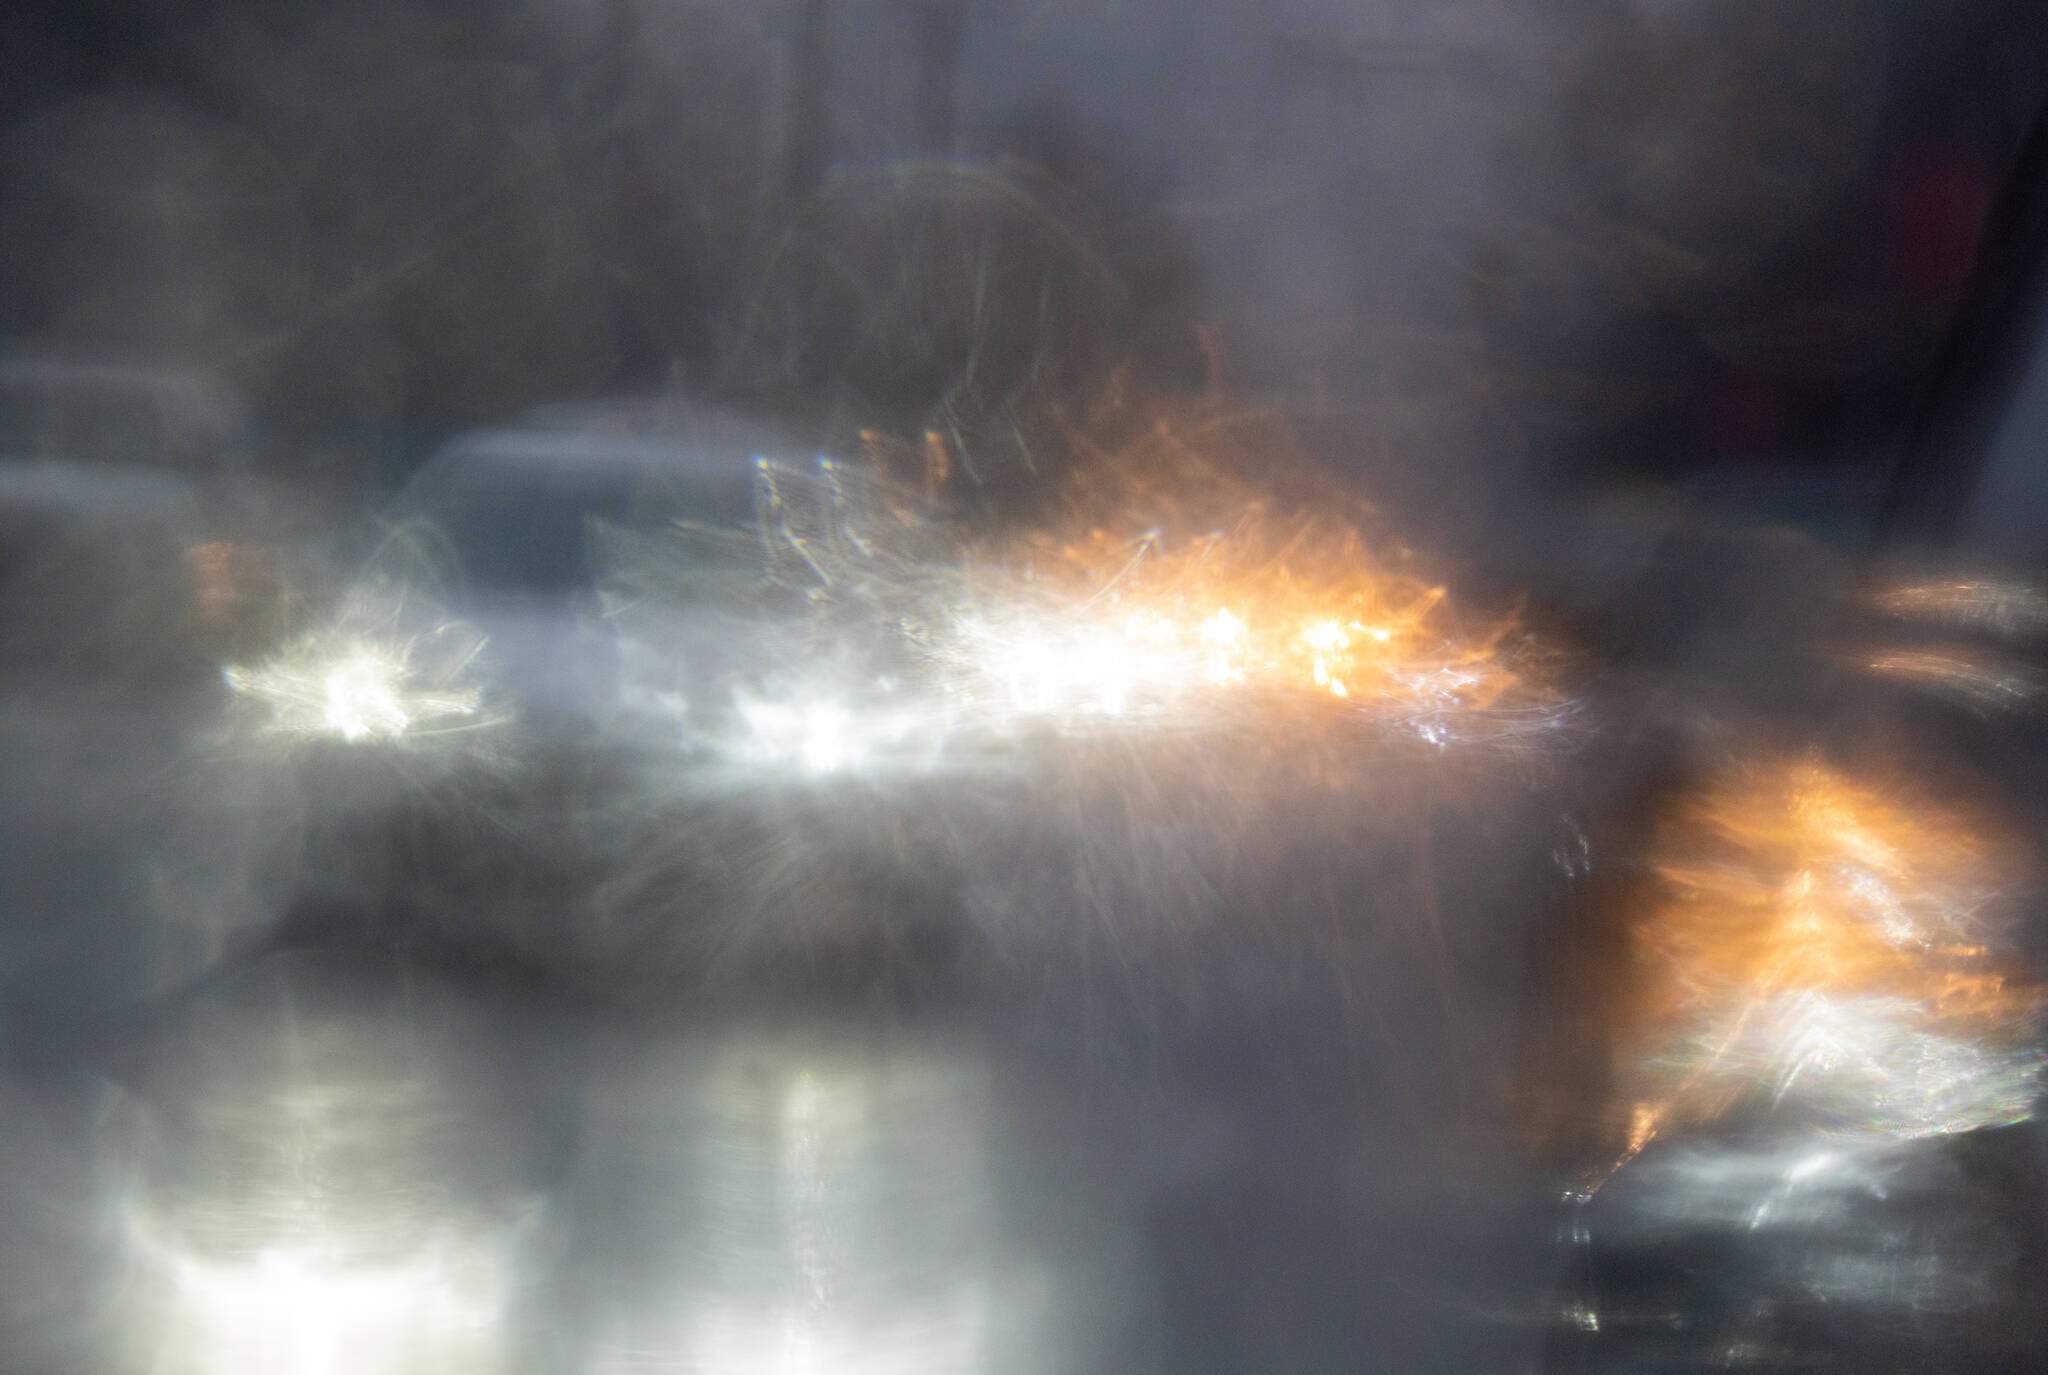 FILE – Traffic is reflected in a rain covered car mirror as cars move through heavy rain in Vancouver, Wednesday, Jan. 12, 2022. An atmospheric river packing “narrow bands of heavy precipitation” is forecast for parts of British Columbia. THE CANADIAN PRESS/Jonathan Hayward